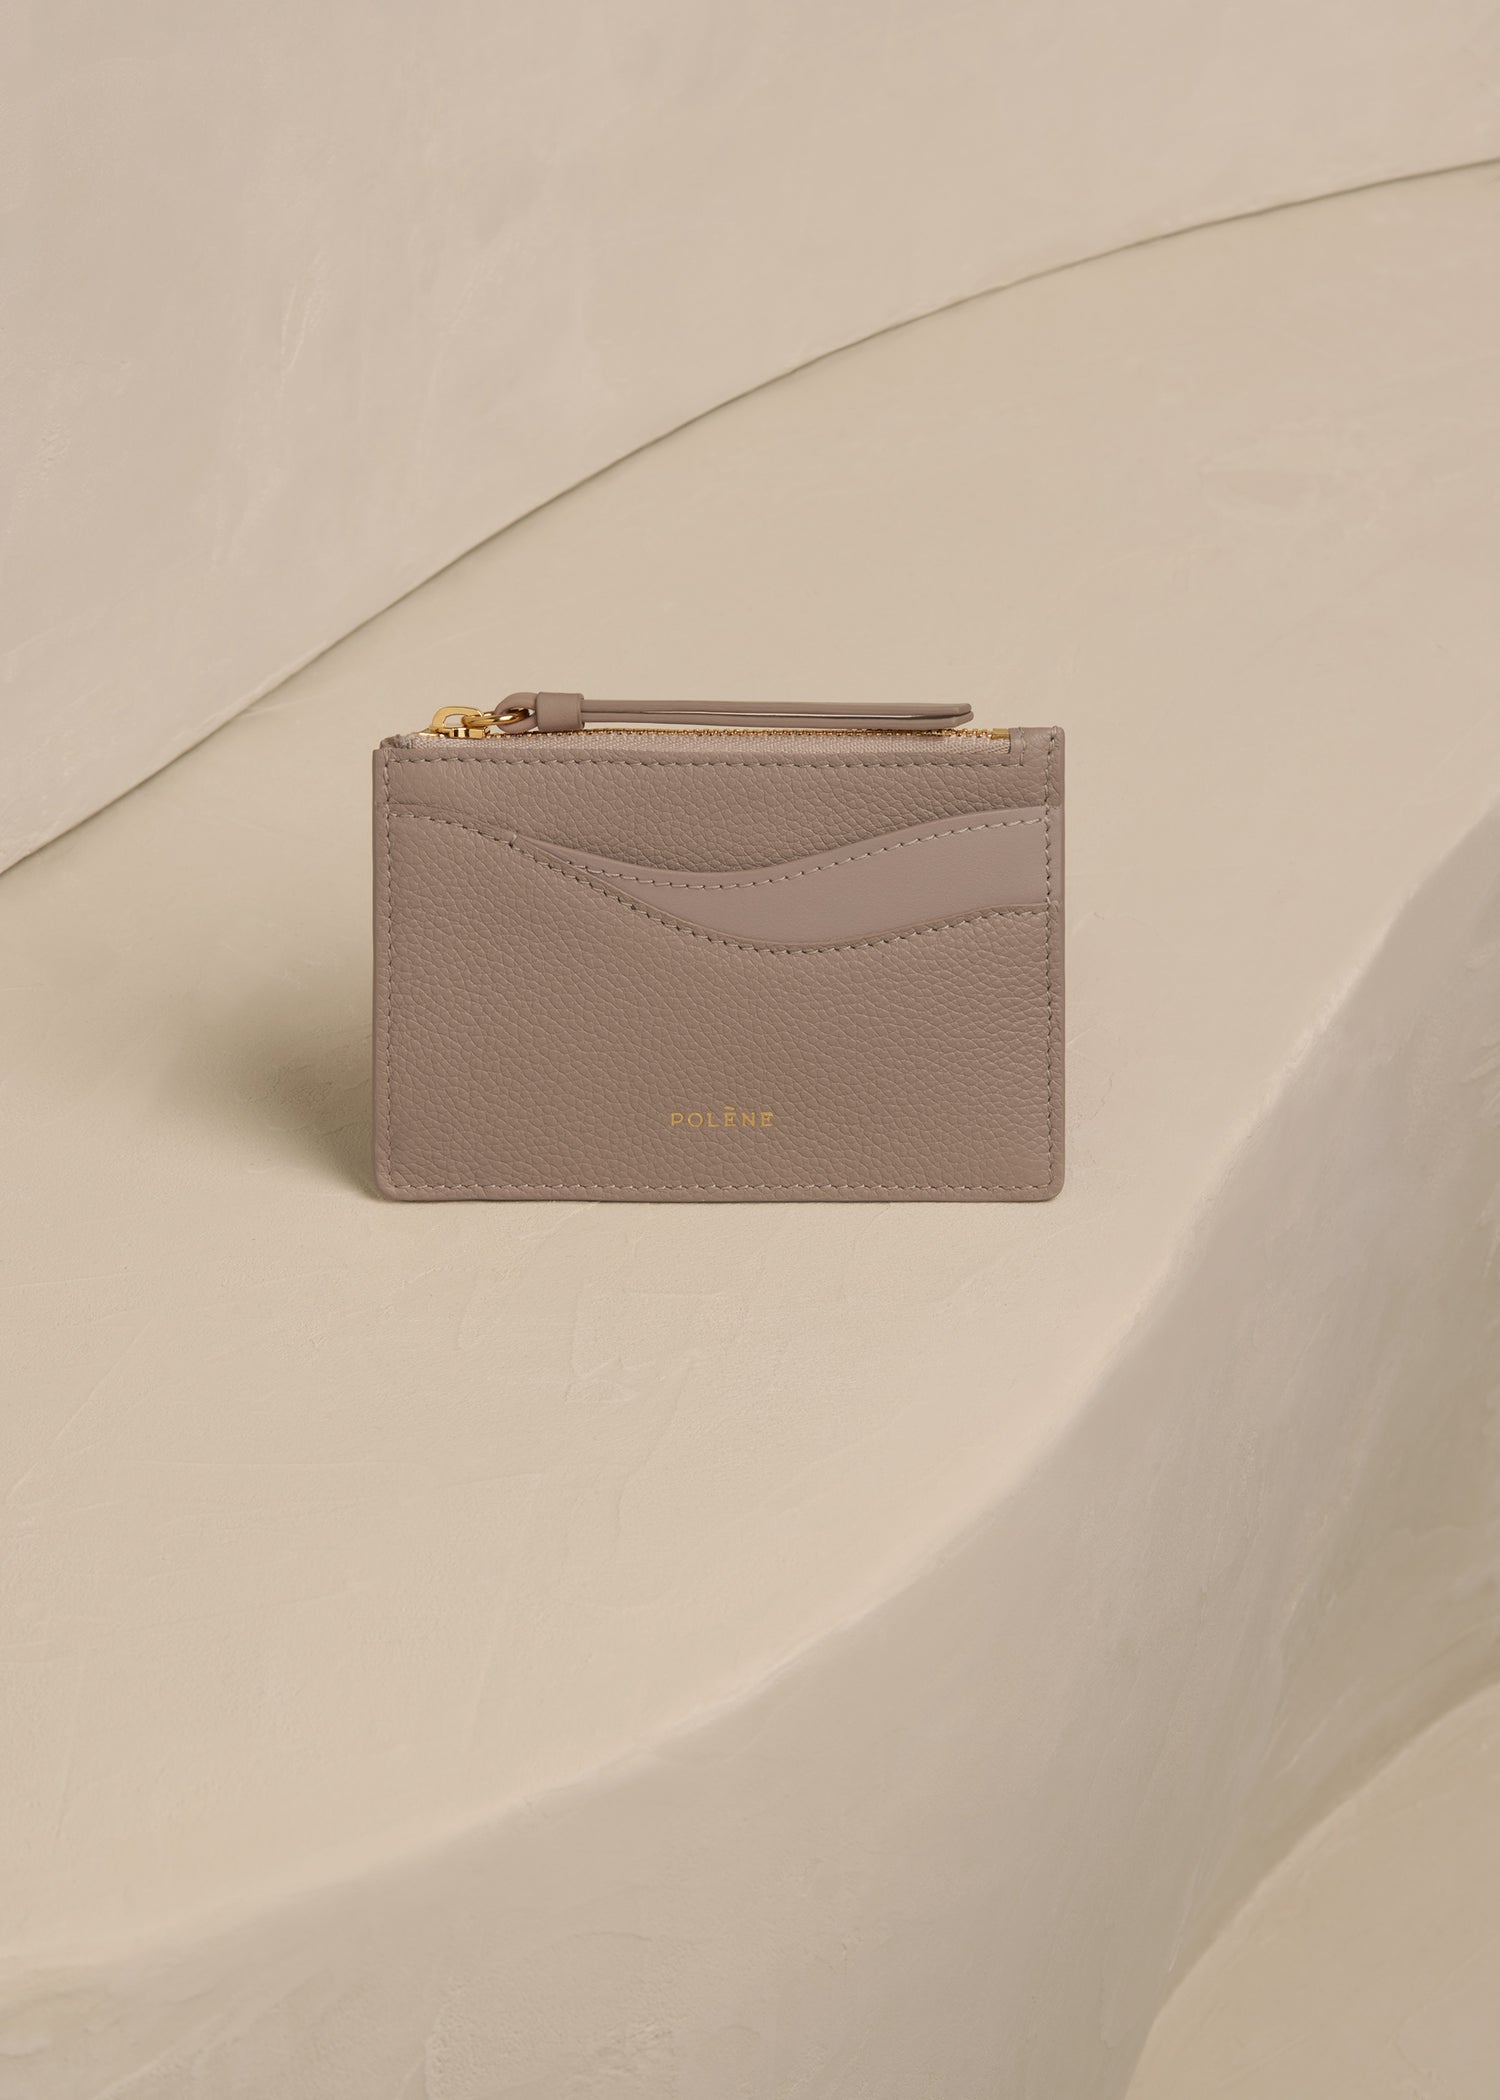 Sierra Mini Pouch - Duo Taupe